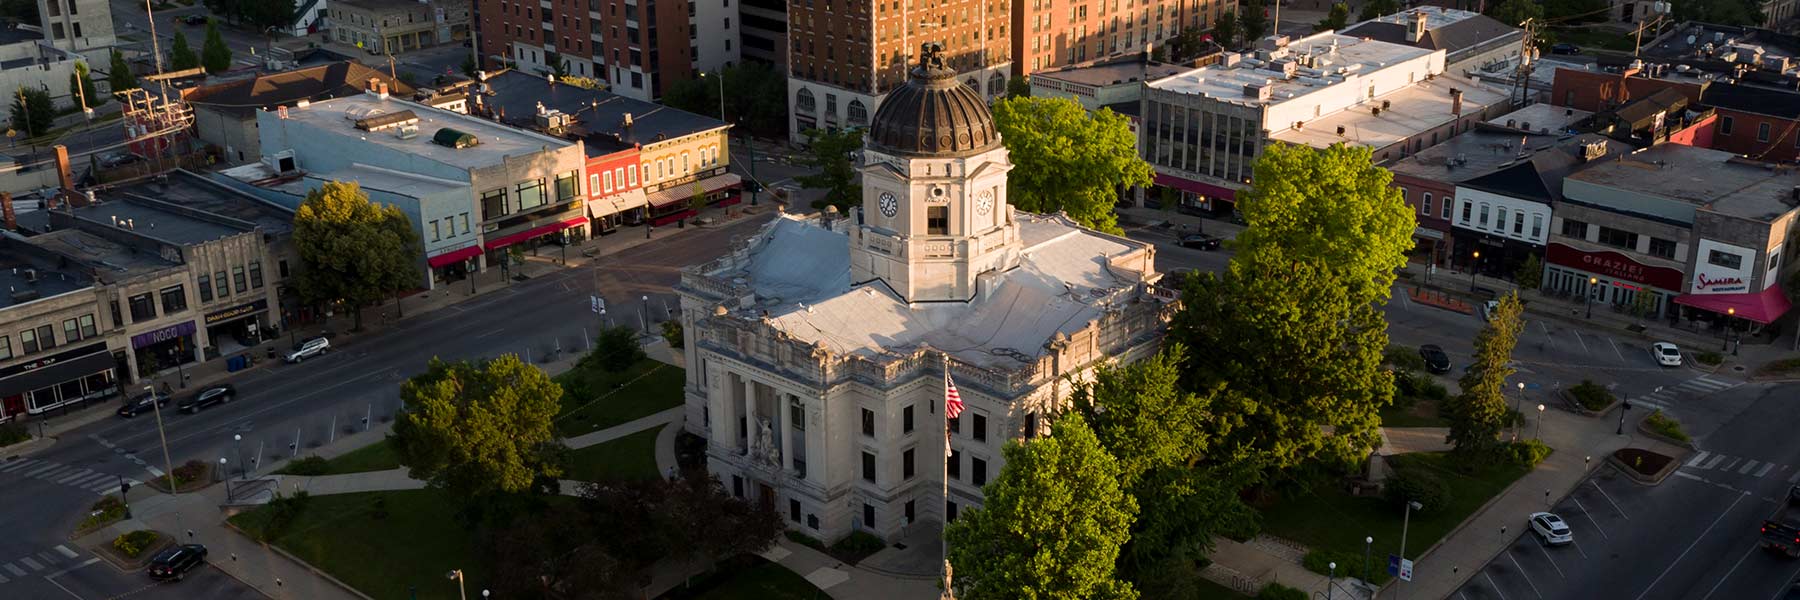 Aerial photo of the Monroe County Courthouse and surrounding shops on the square.